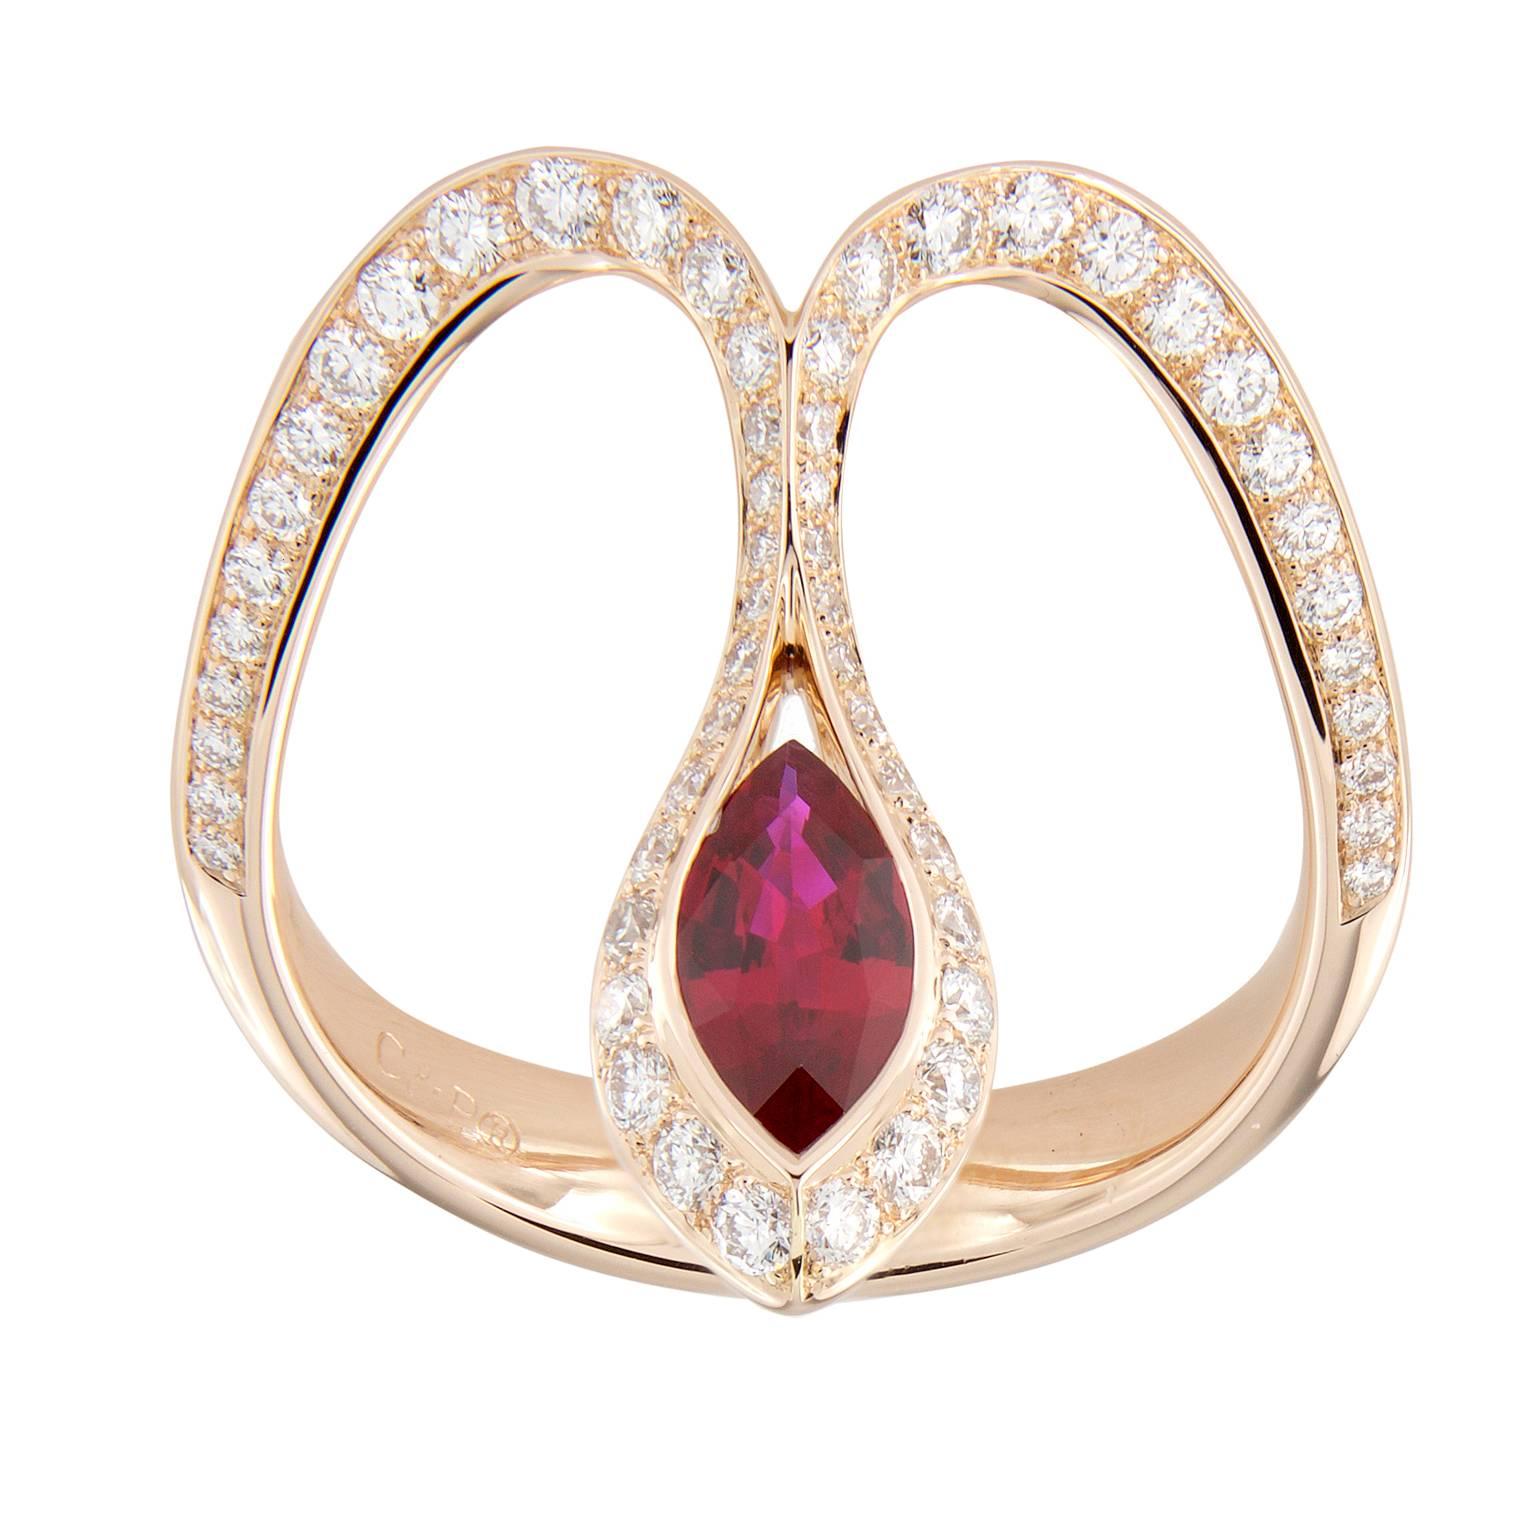 Baenteli’s Royales Collection is inspired by drops of light, dew and precious stones. This expertly crafted ring of 18k yellow gold features a marquise 